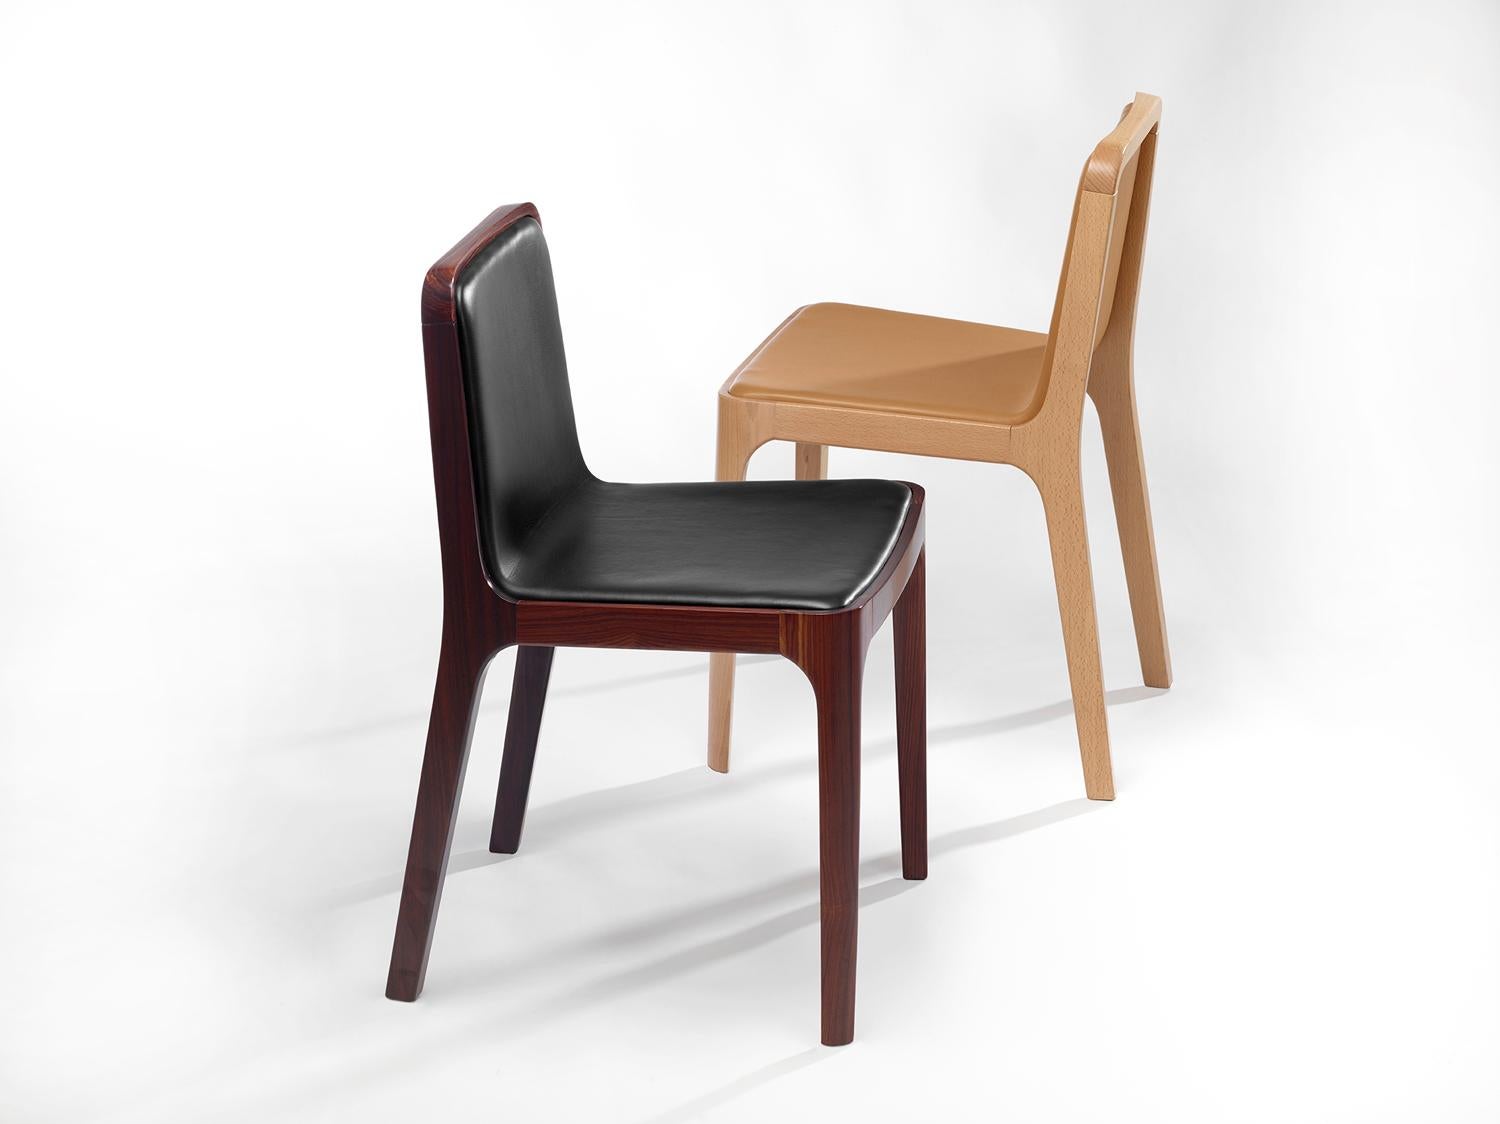 Minimalist Modern Chair in Beech Wood Leather Upholstery For Sale 5